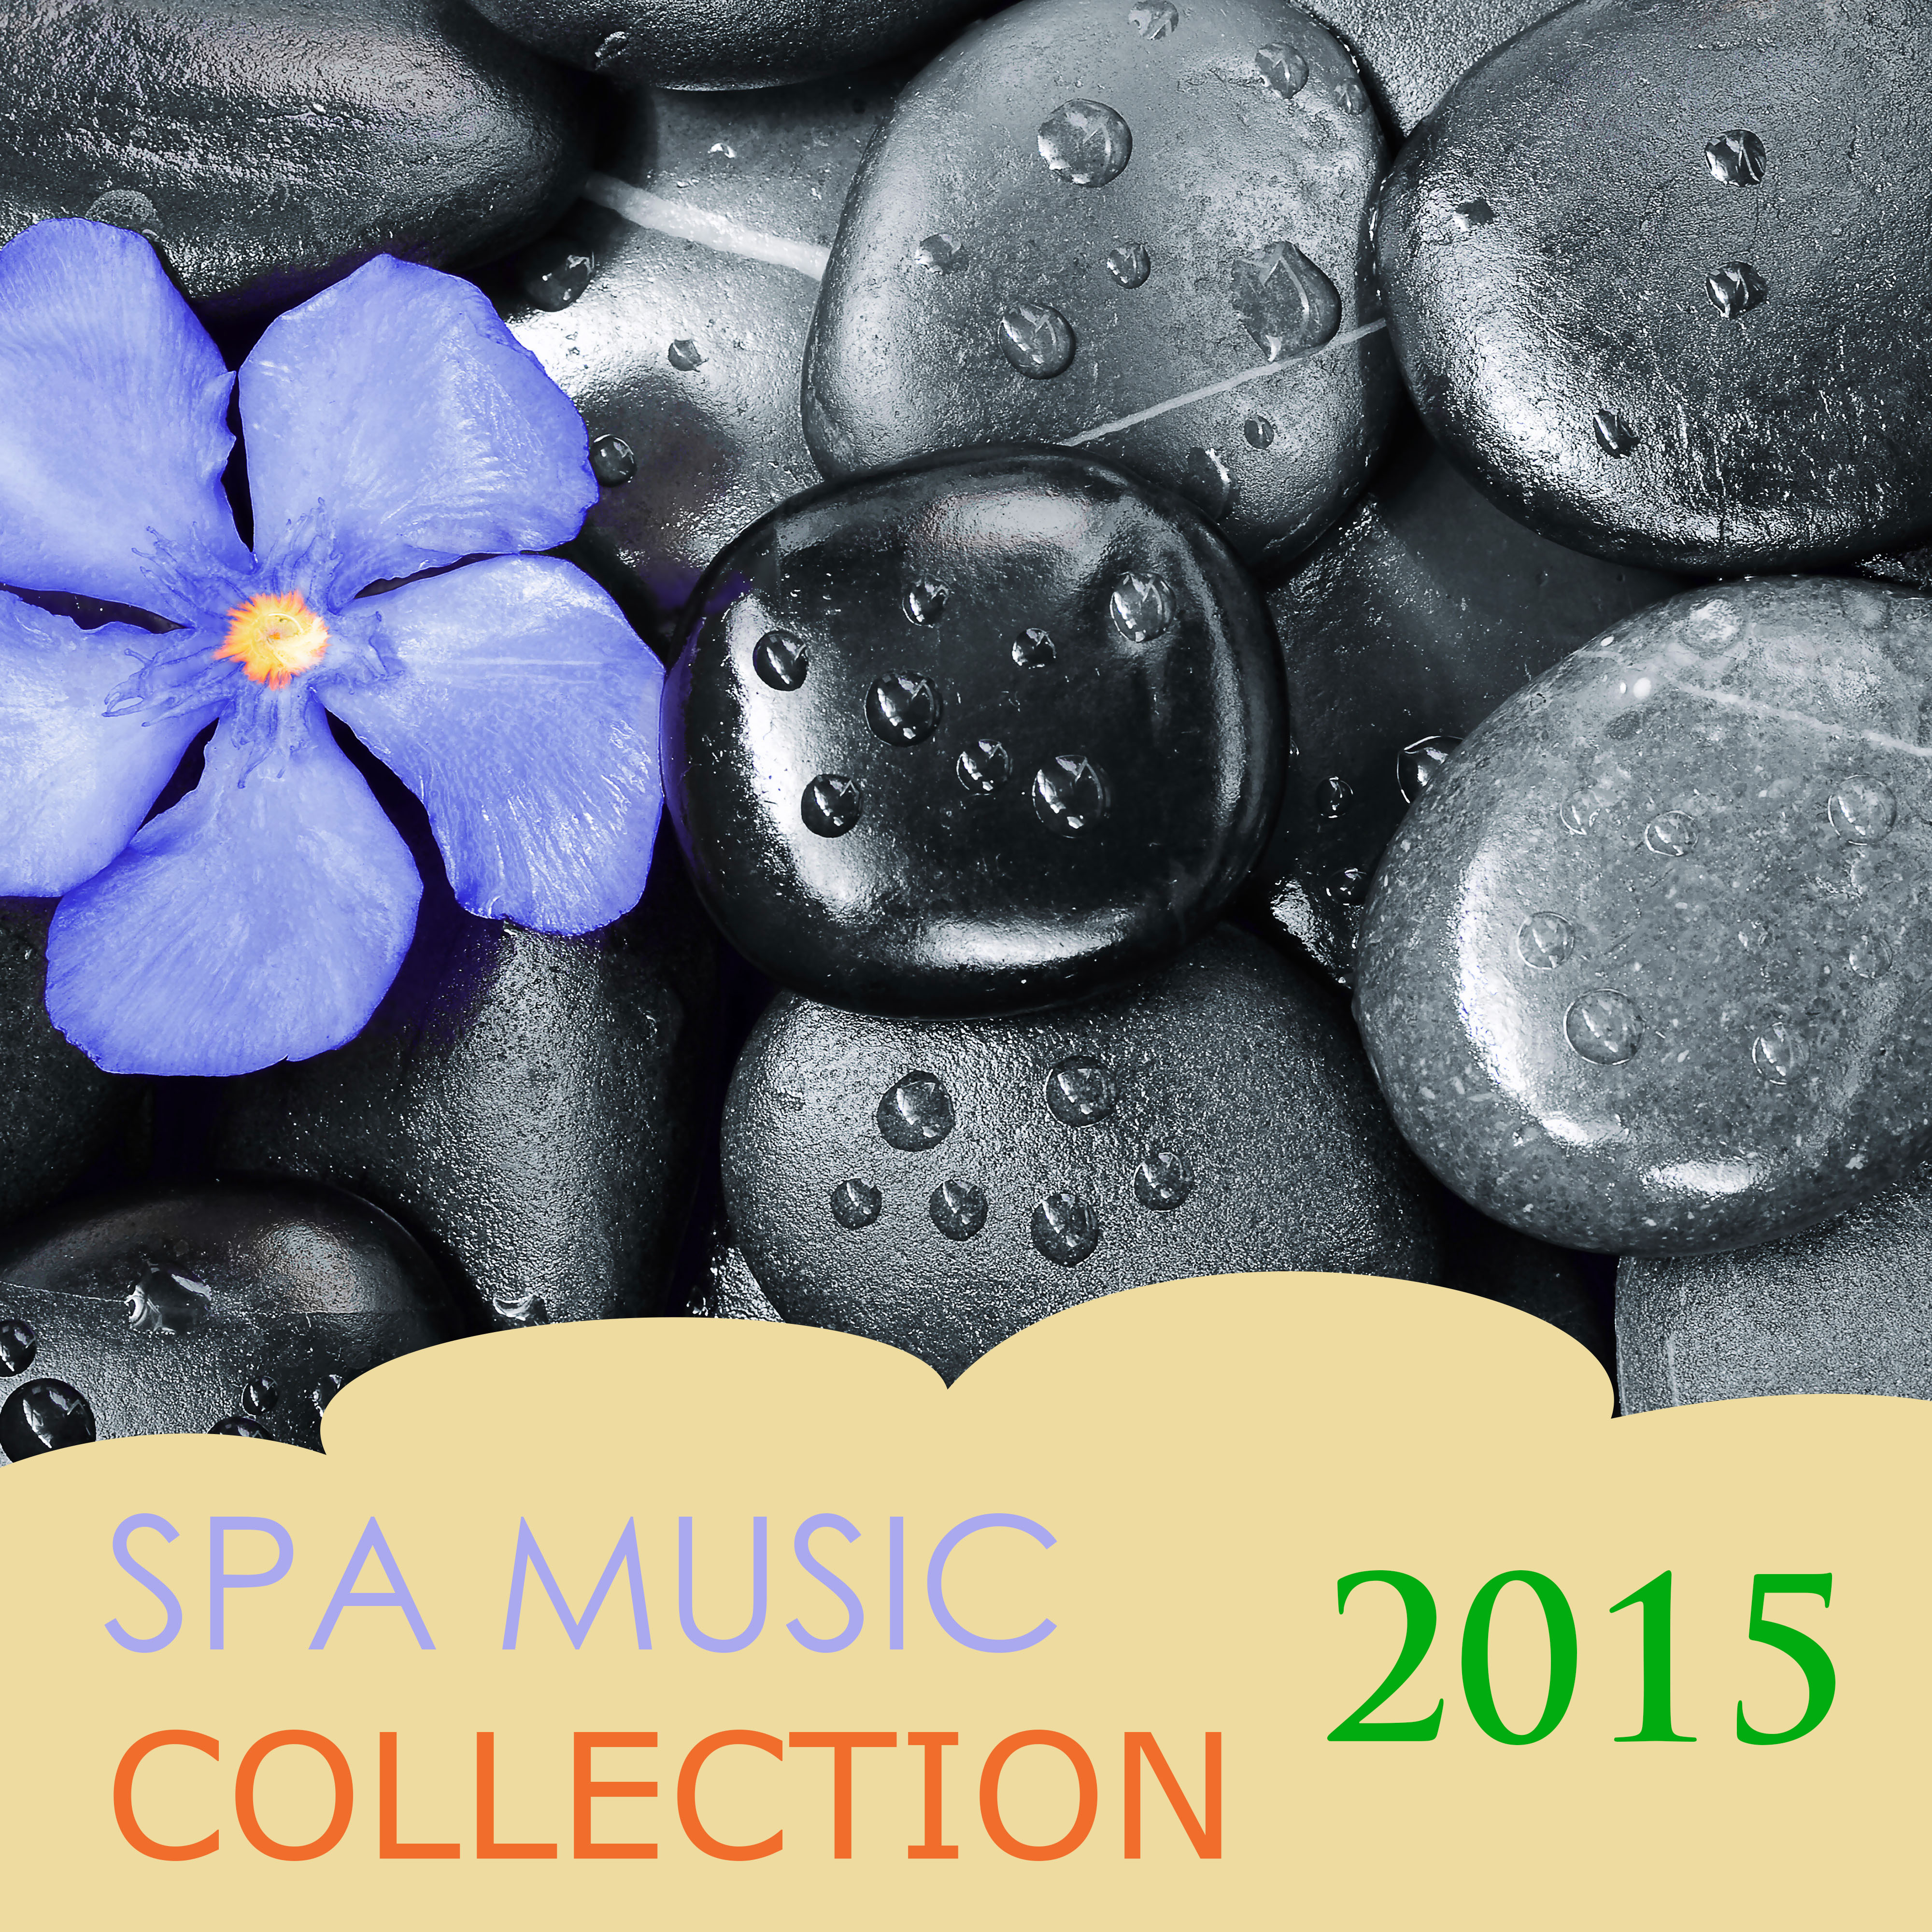 Spa Music Collection 2015 - Top Wellness Center Hits, Great Songs for Relaxation and Relaxing at Home